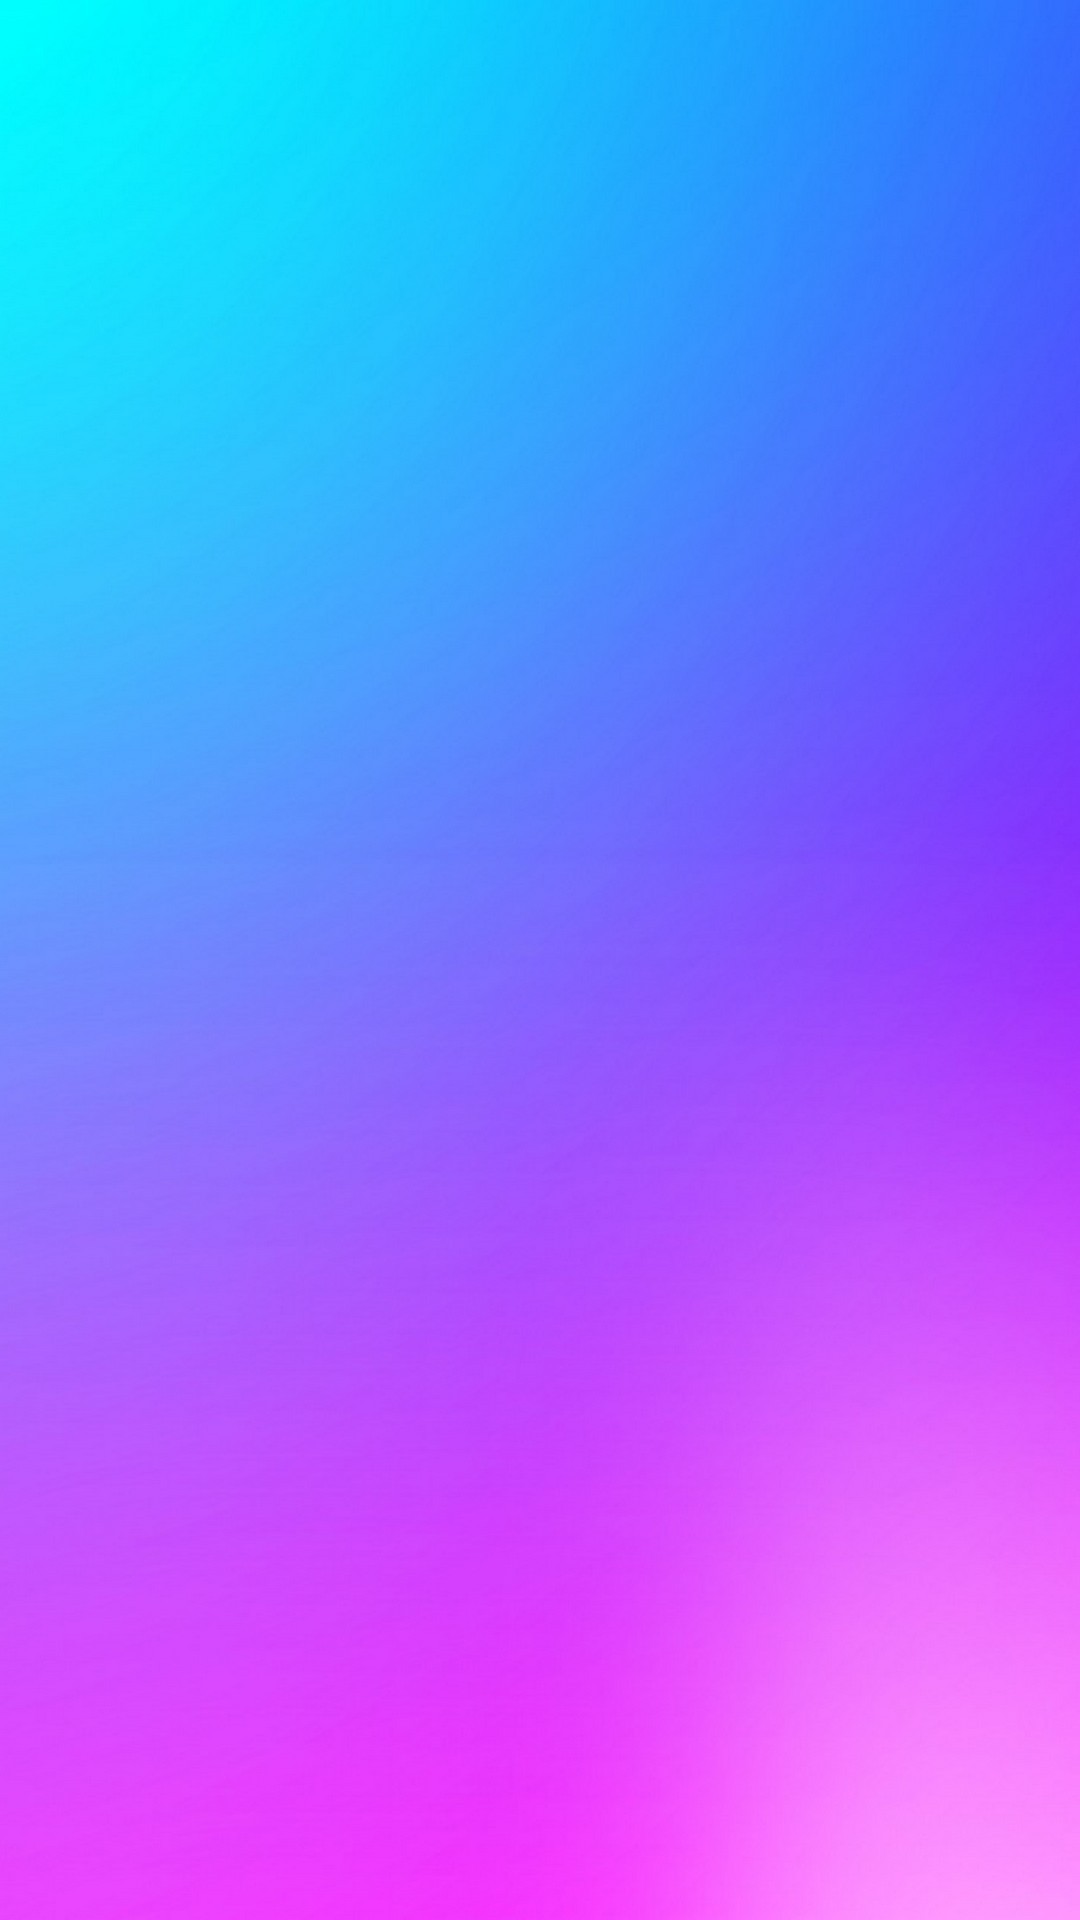 Gradient iPhone Wallpaper Home Screen with high-resolution 1080x1920 pixel. You can set as wallpaper for Apple iPhone X, XS Max, XR, 8, 7, 6, SE, iPad. Enjoy and share your favorite HD wallpapers and background images